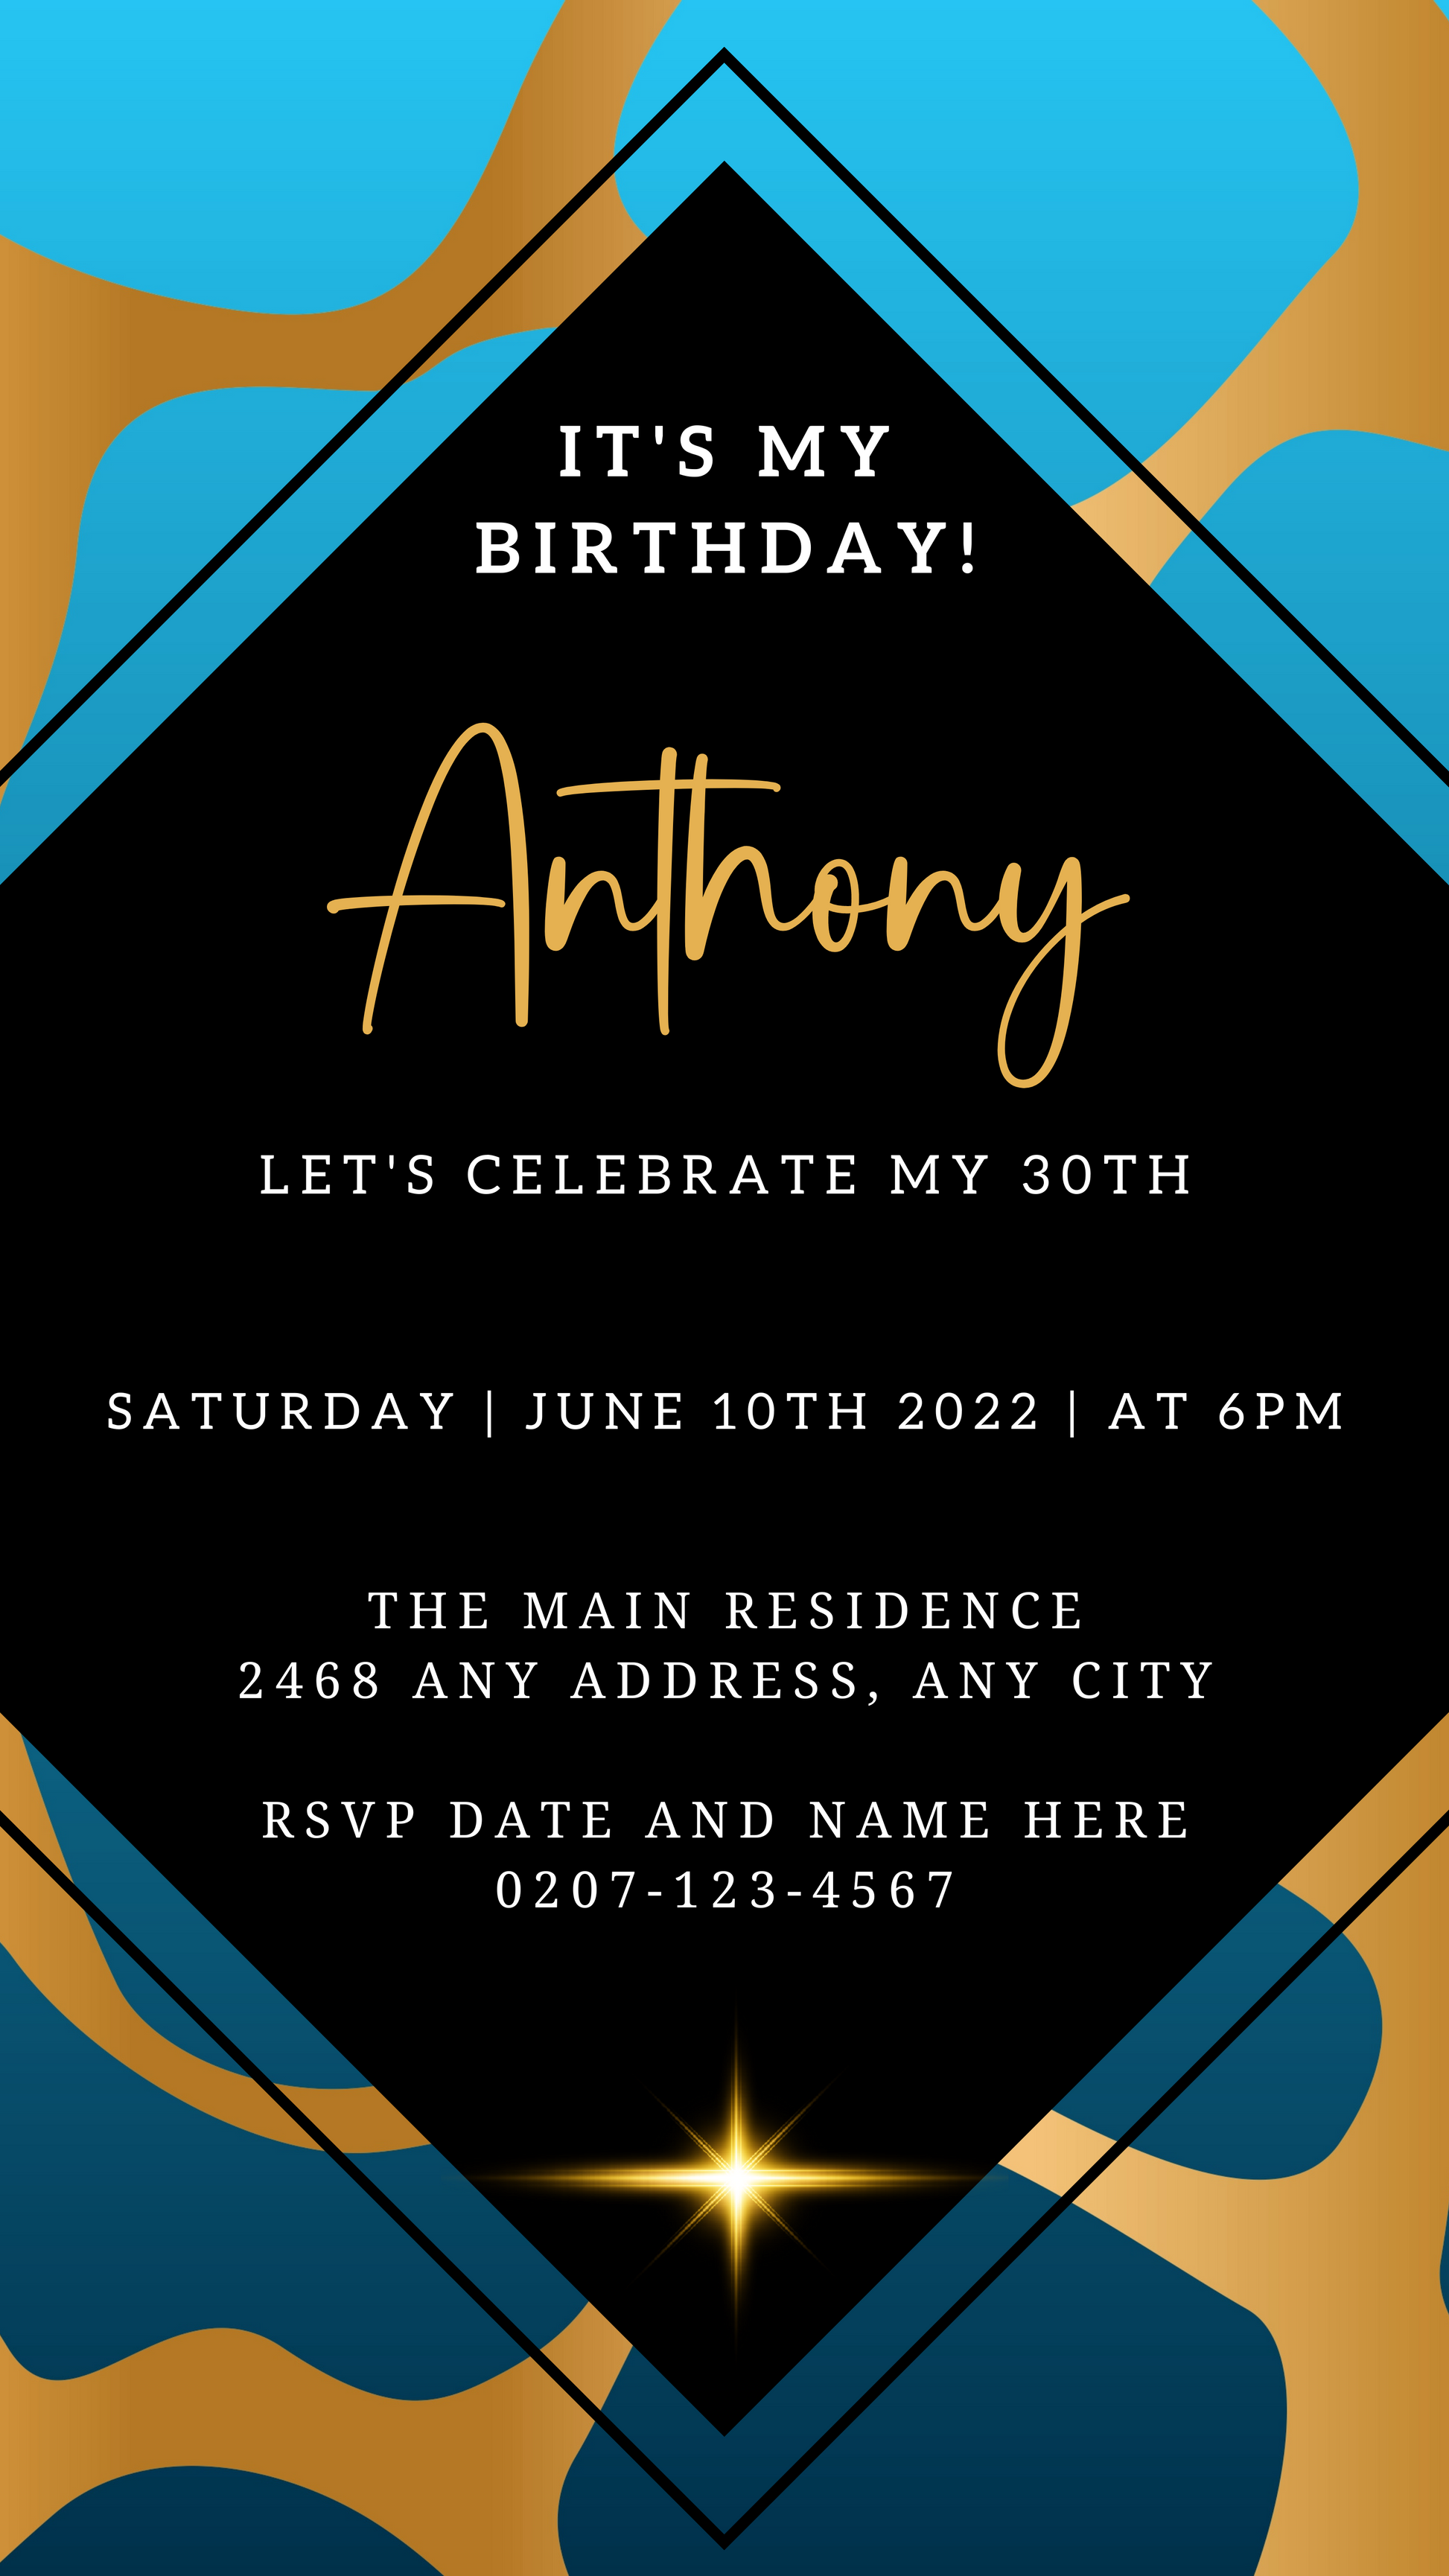 Blue Gold Abstract Print | Customisable Party Evite, featuring editable text on a black background with gold accents. Download and personalize via Canva for digital sharing.